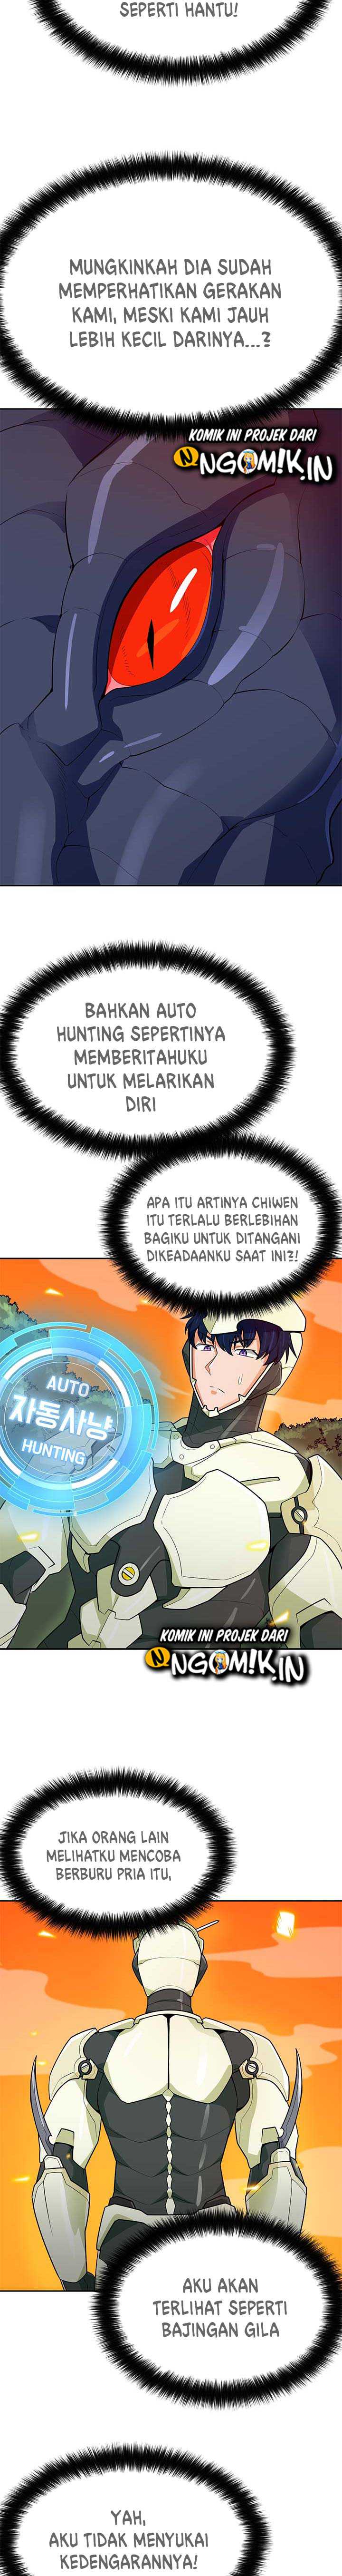 Auto Hunting Chapter 82